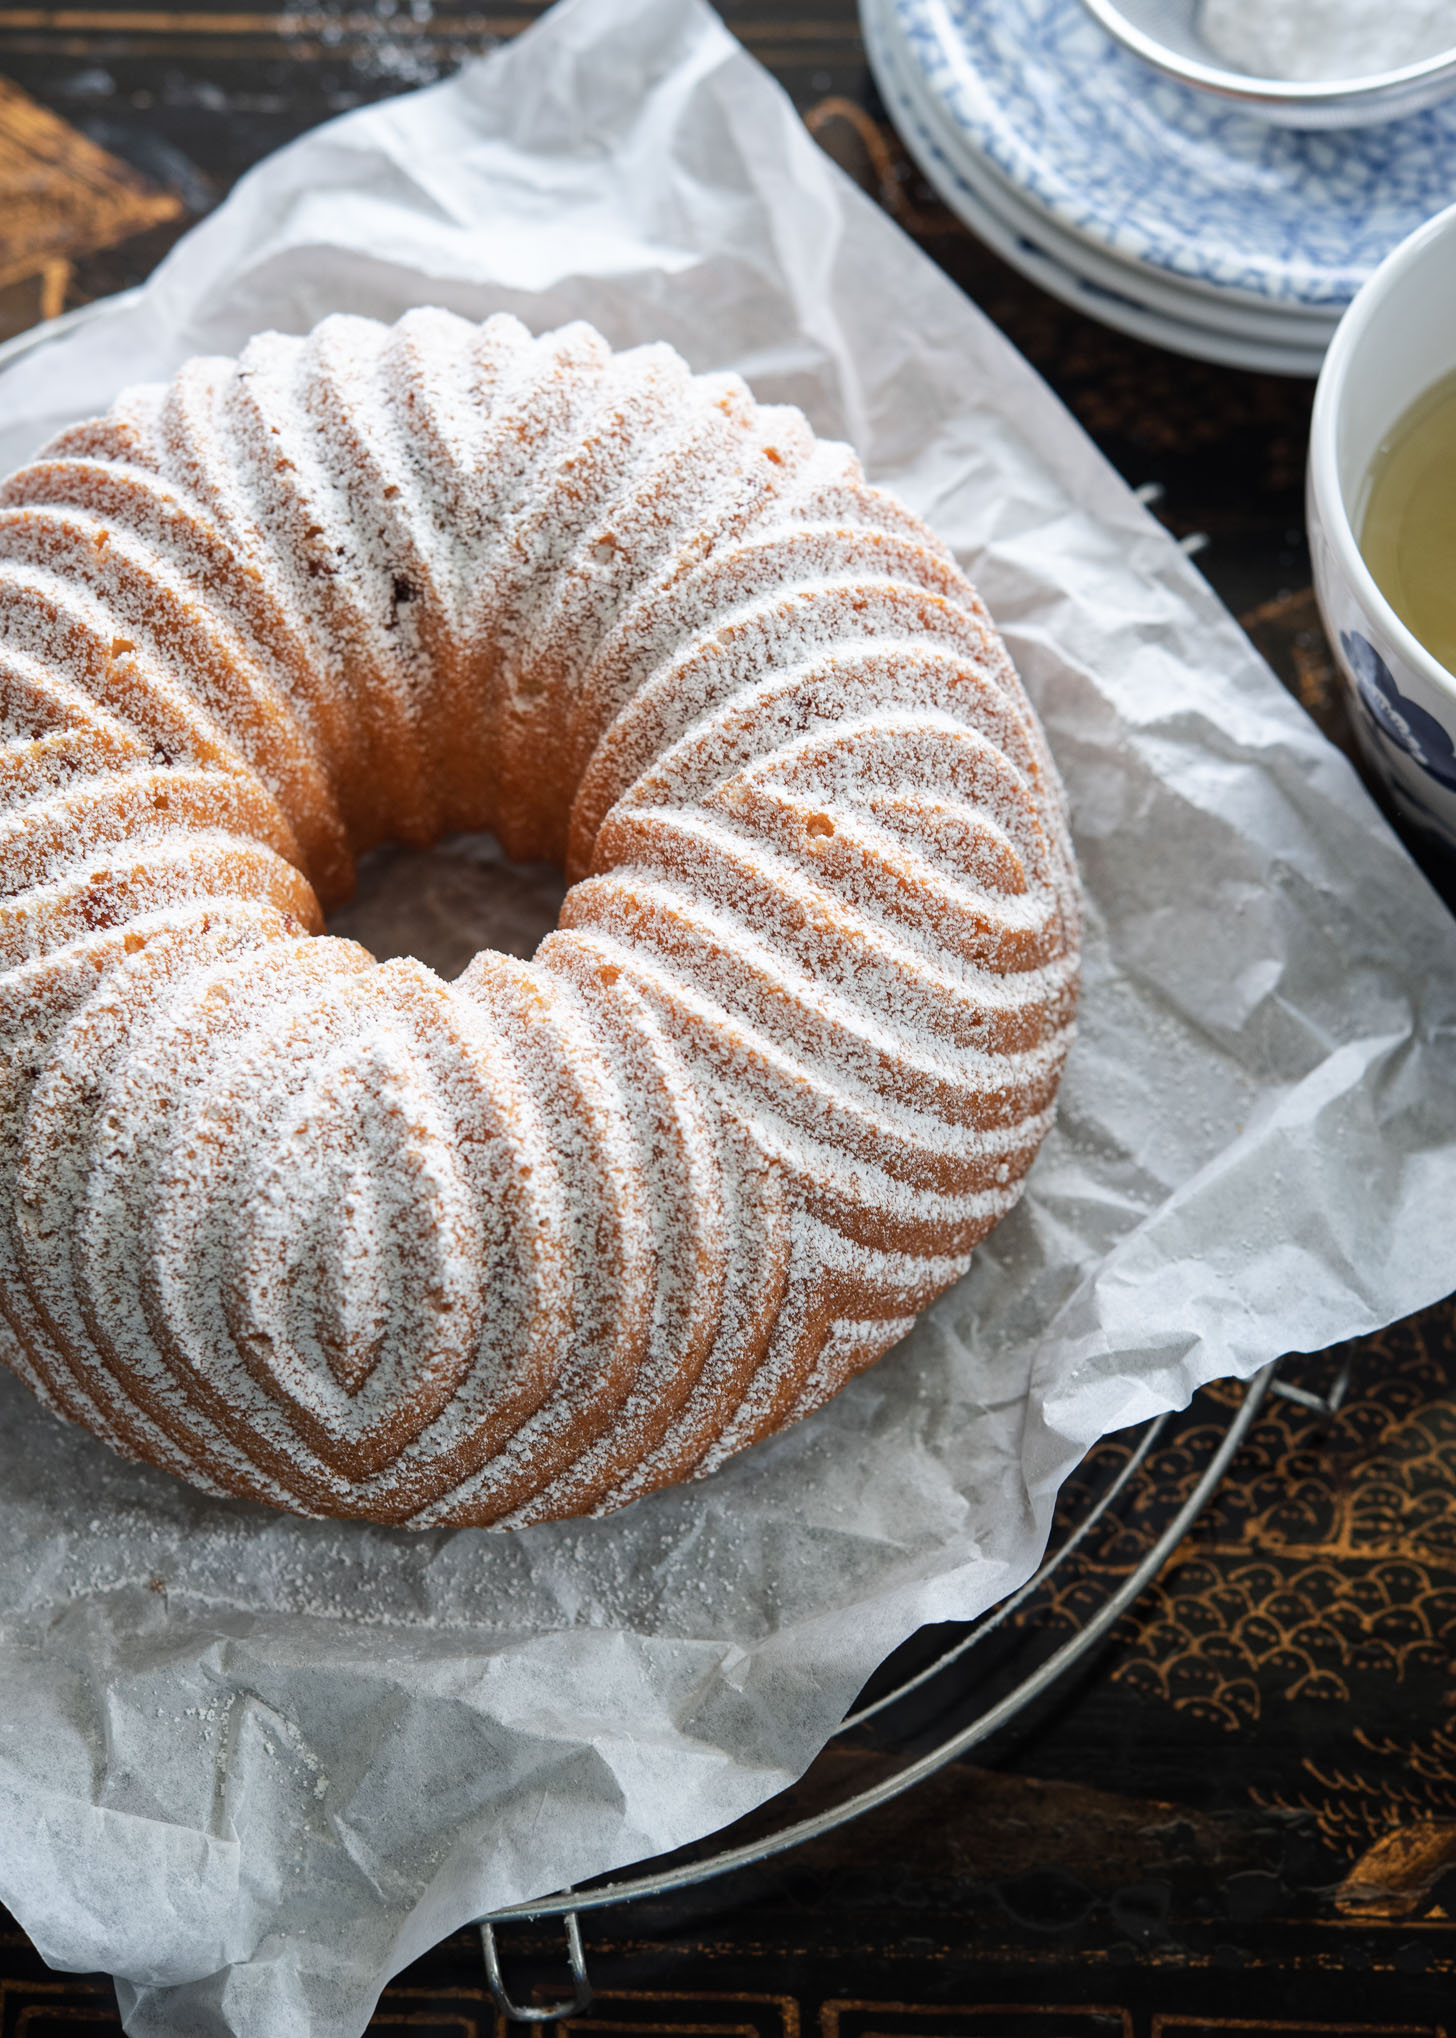 Peach pound cake is baked in a barbarian bundt pan and dusted with powdered sugar.